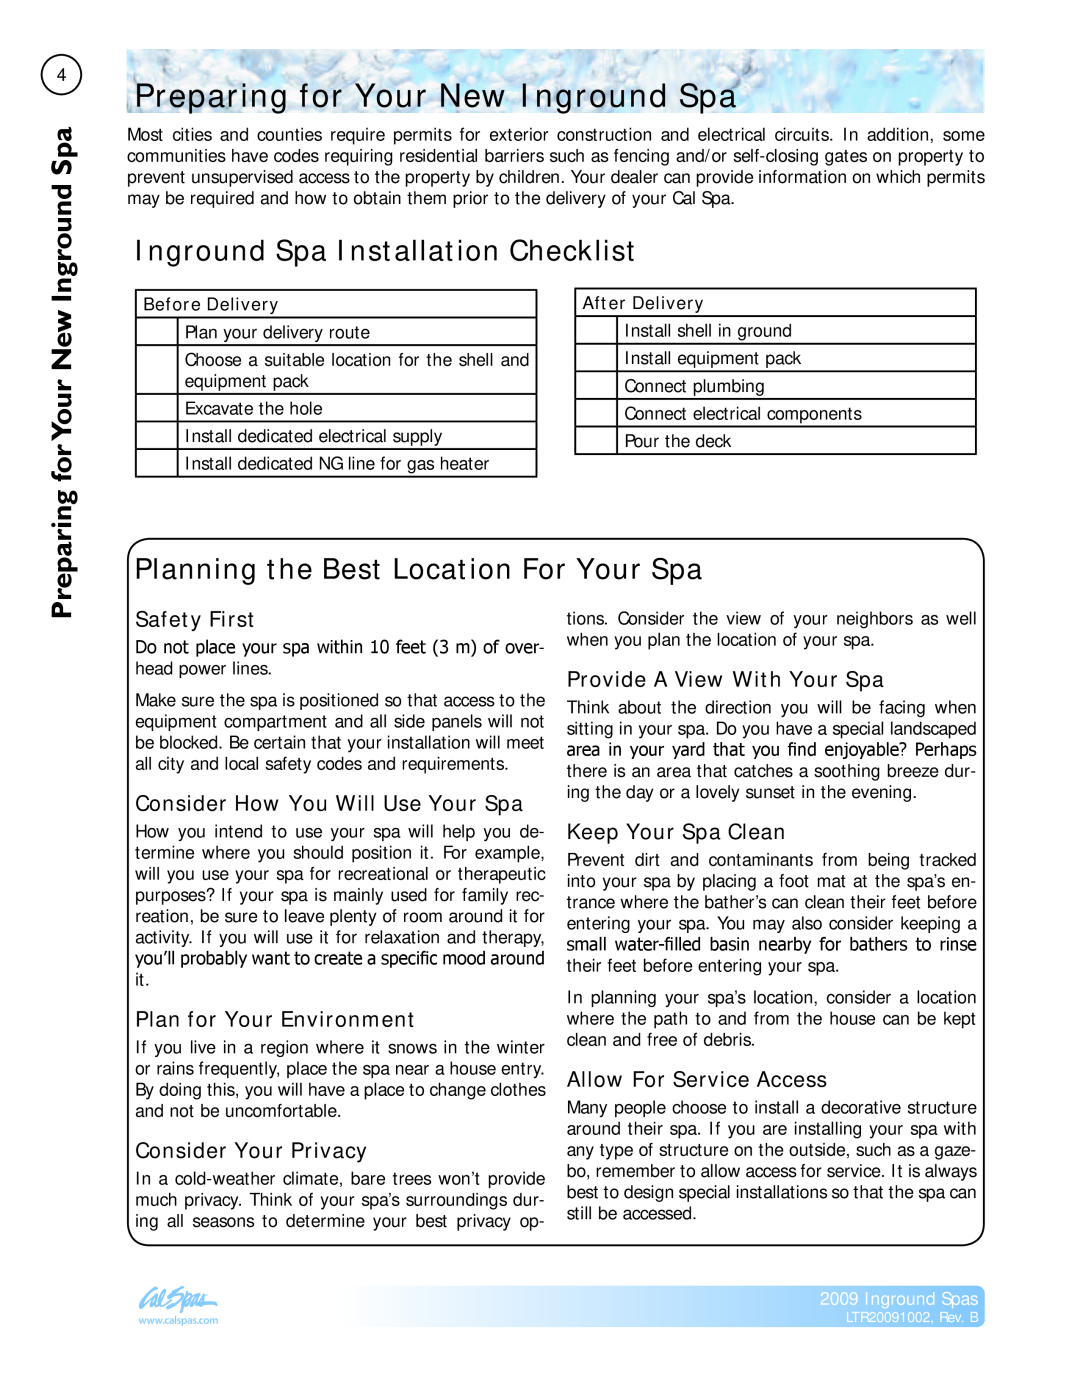 Cal Spas LTR20091002 Preparing for Your New Inground Spa, Inground Spa Installation Checklist, forYour New, Safety First 